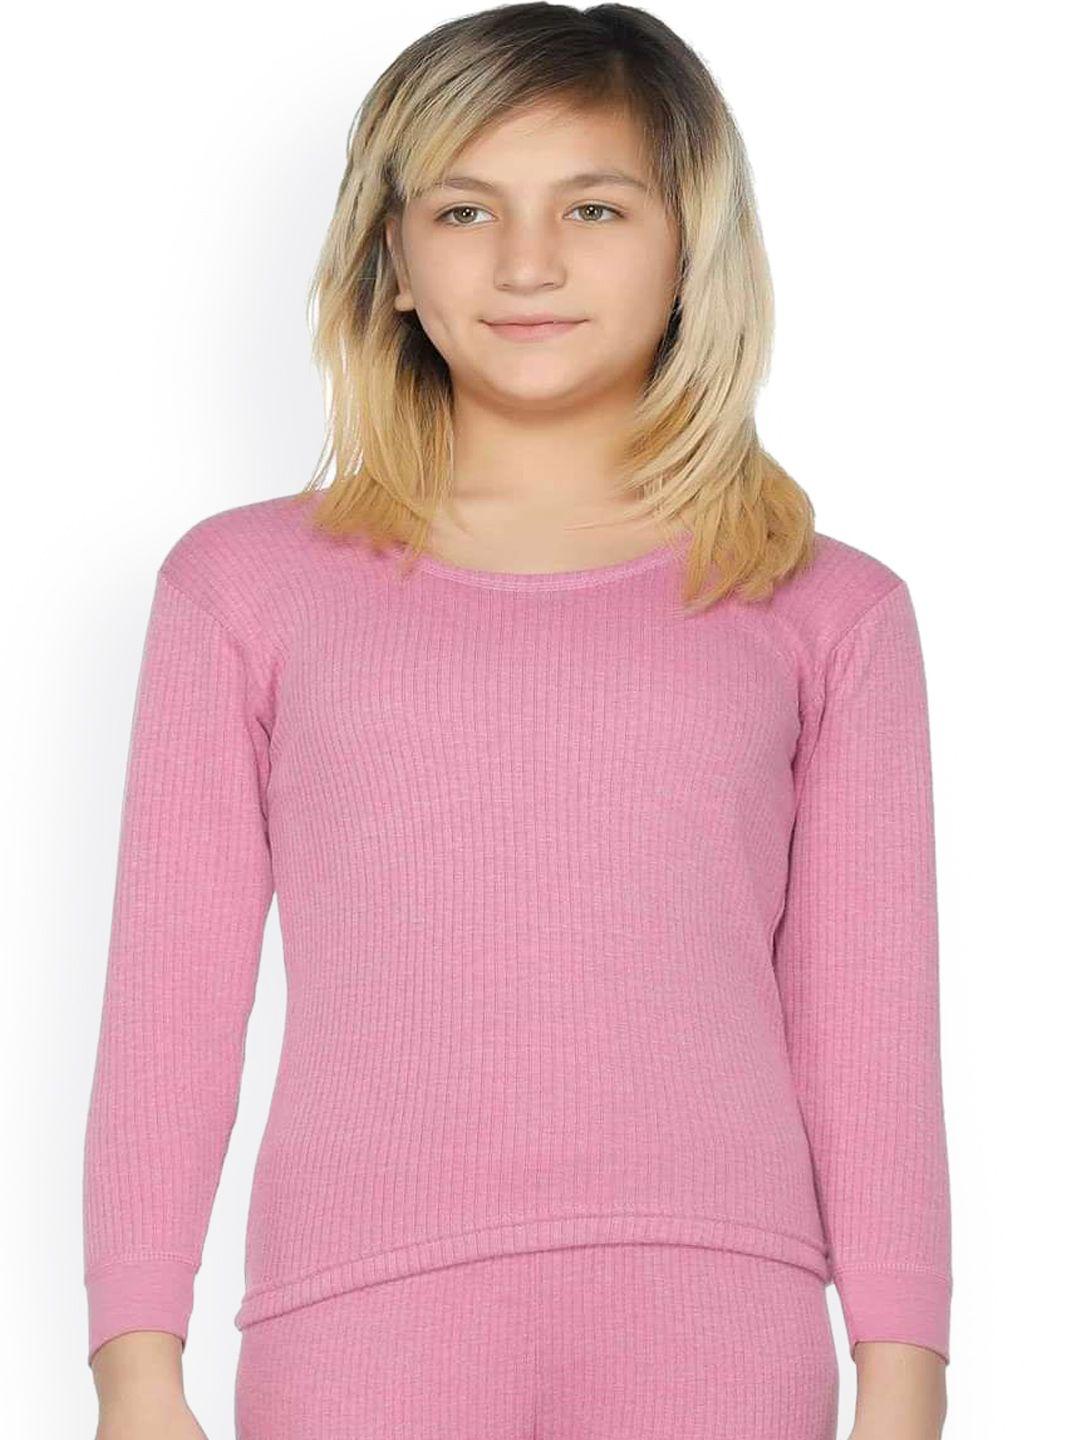 bodycare-kids-boys-fuchsia-pink-solid-cotton-thermal-tops